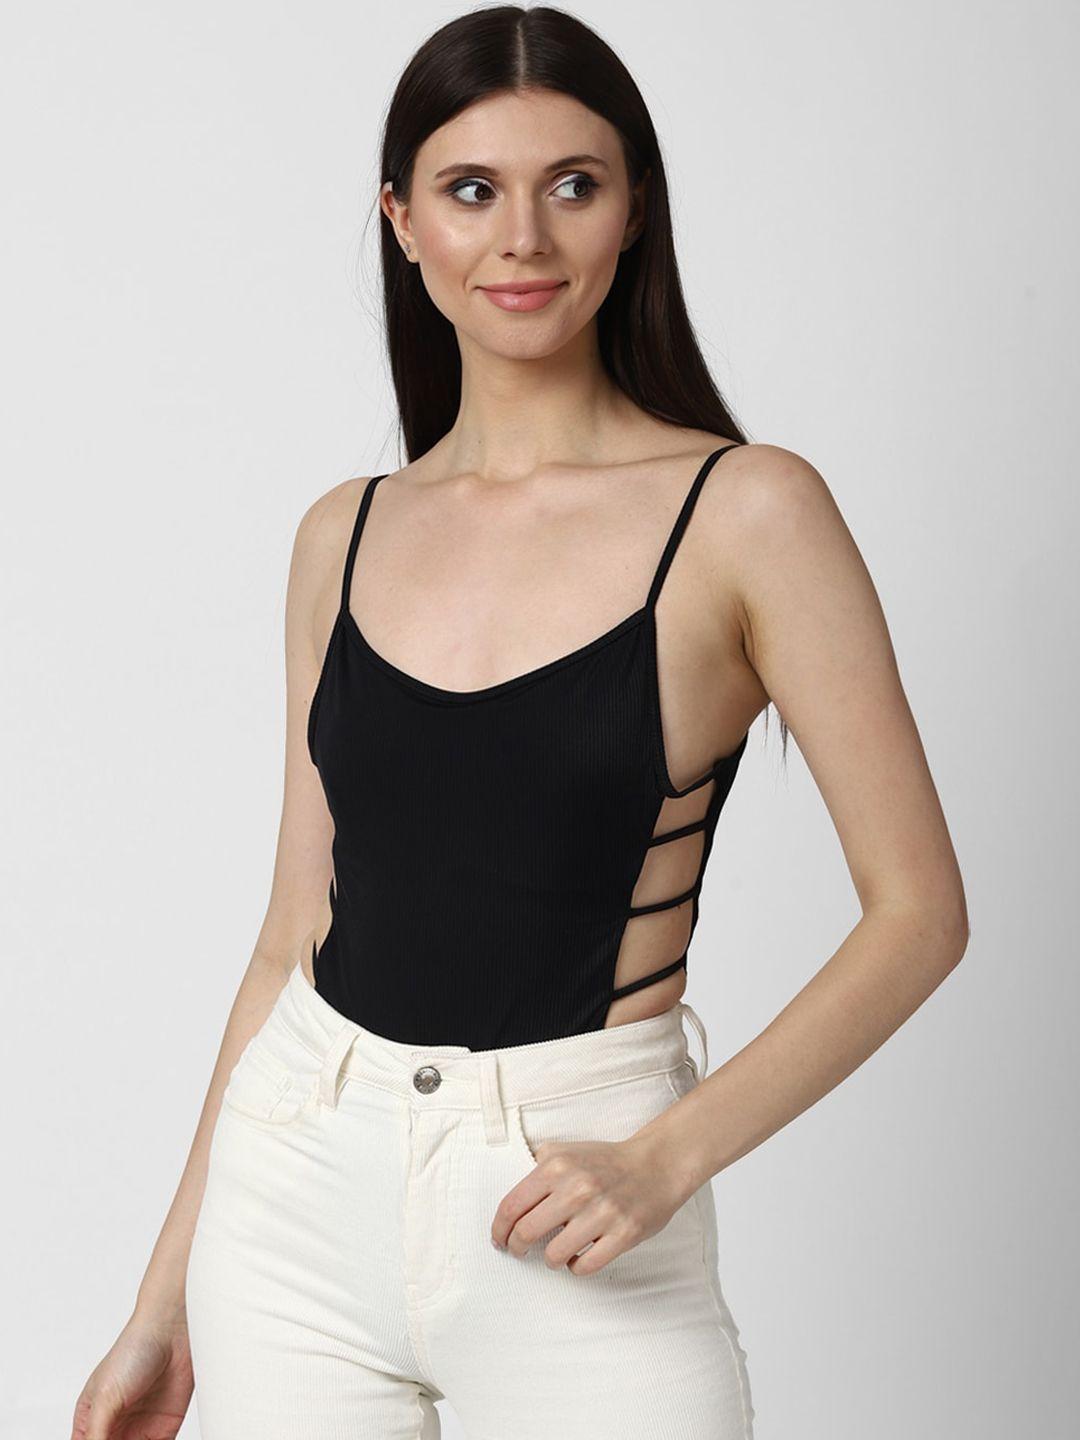 forever-21-women-black-solid-cut-out-body-suit